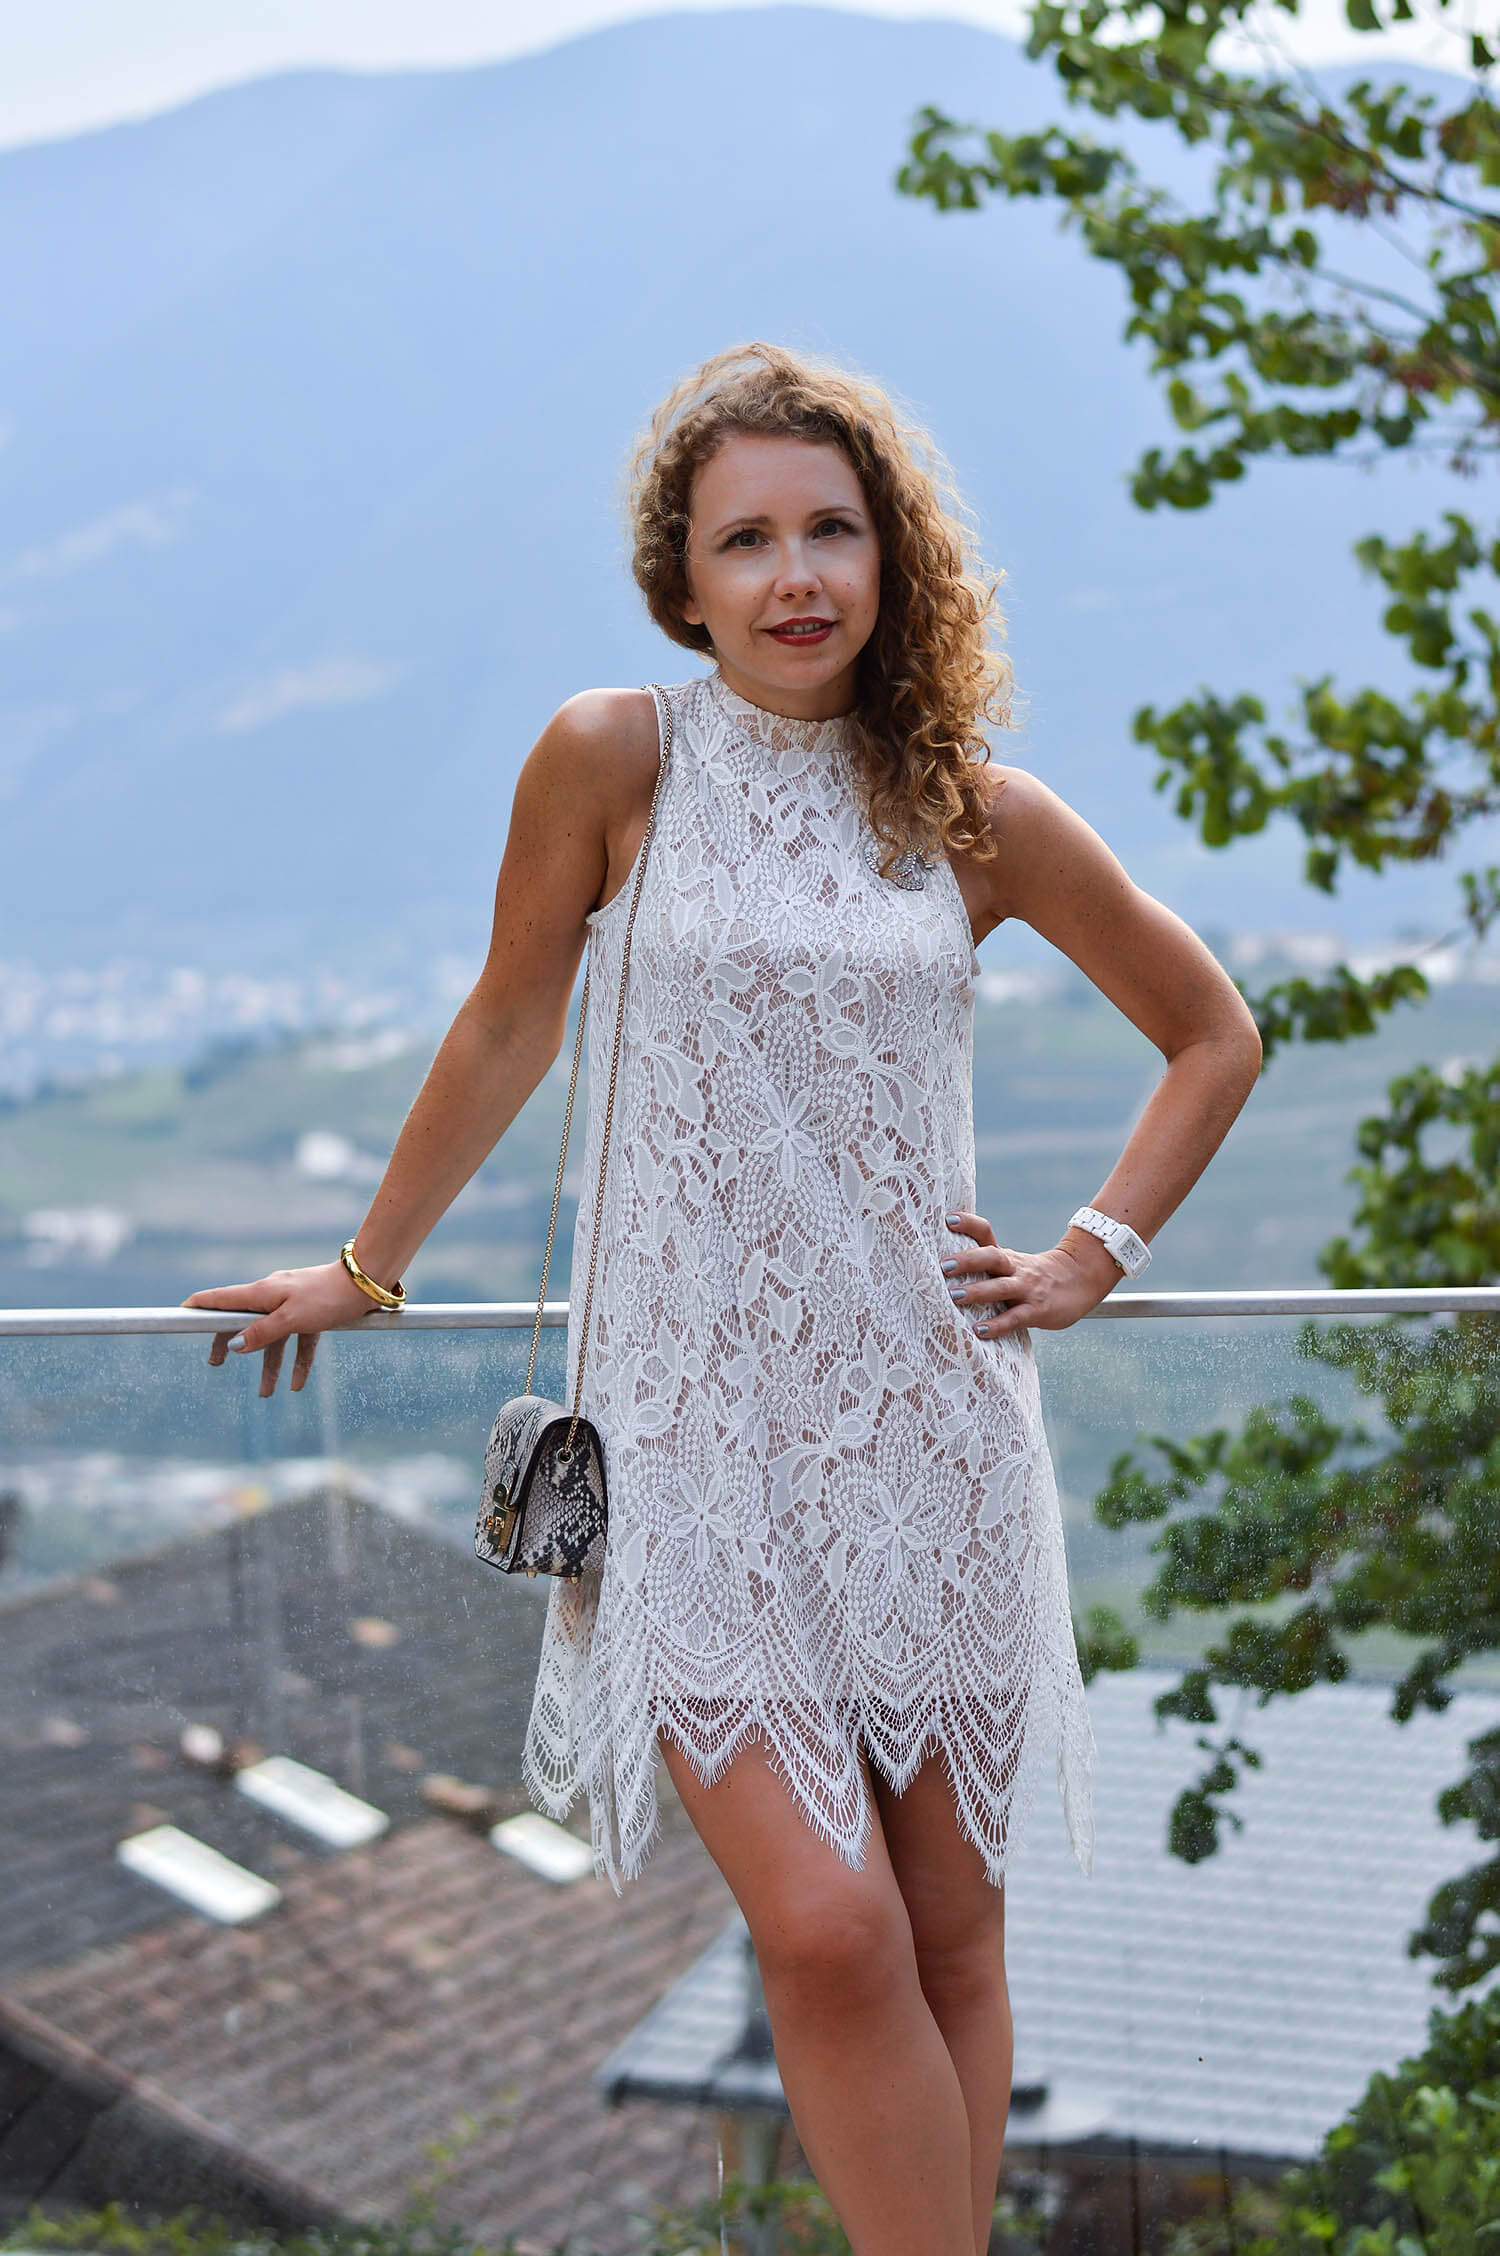 Kationette-fashionblog-Outfit-Lace-Dress-T-Strap-Sandals-Furla-View-South-Tyrol-hotel-hohenwart